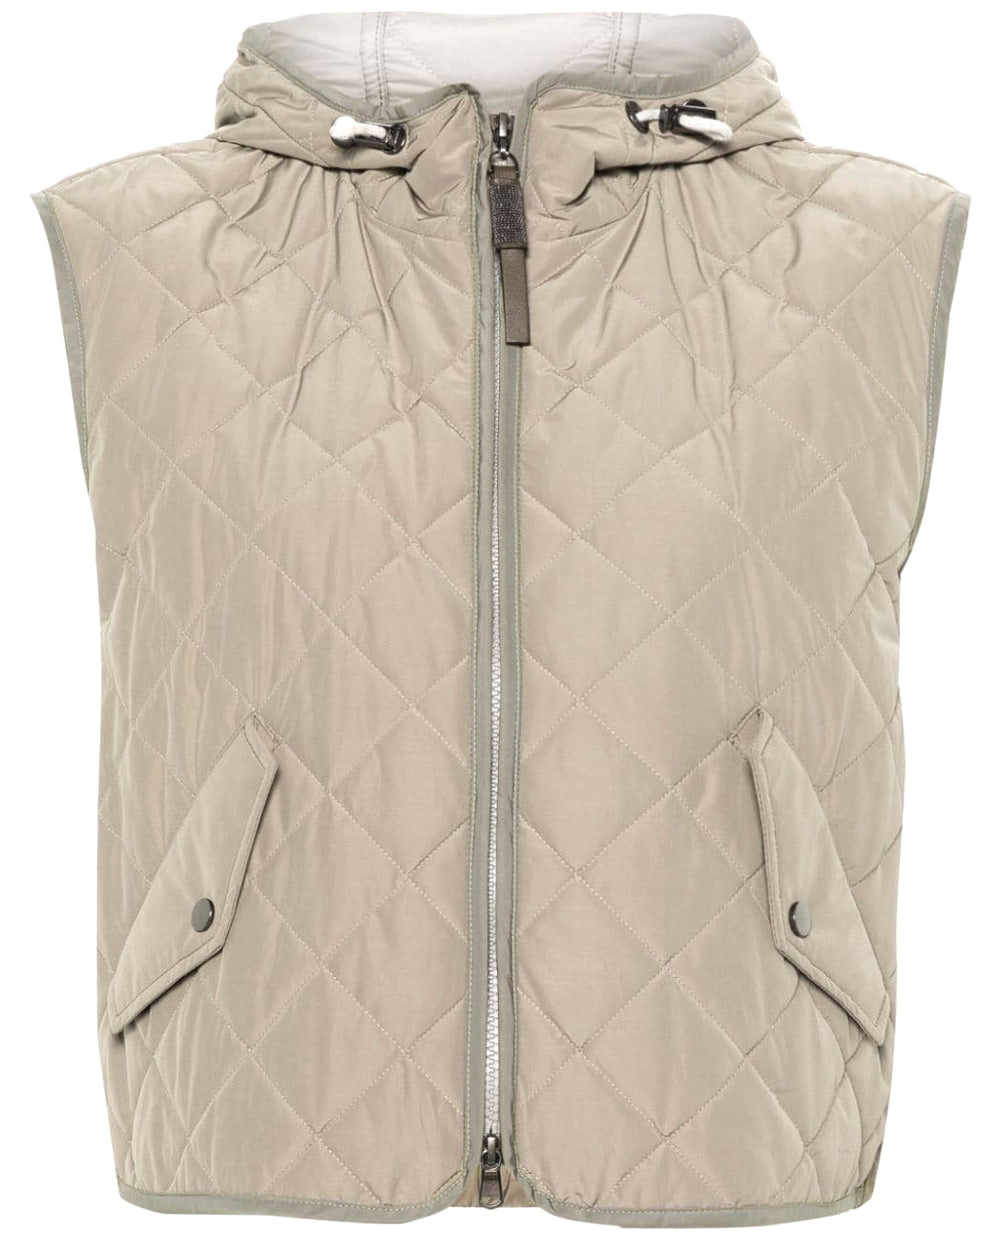 Dove Grey Quilted Drawstring Vest